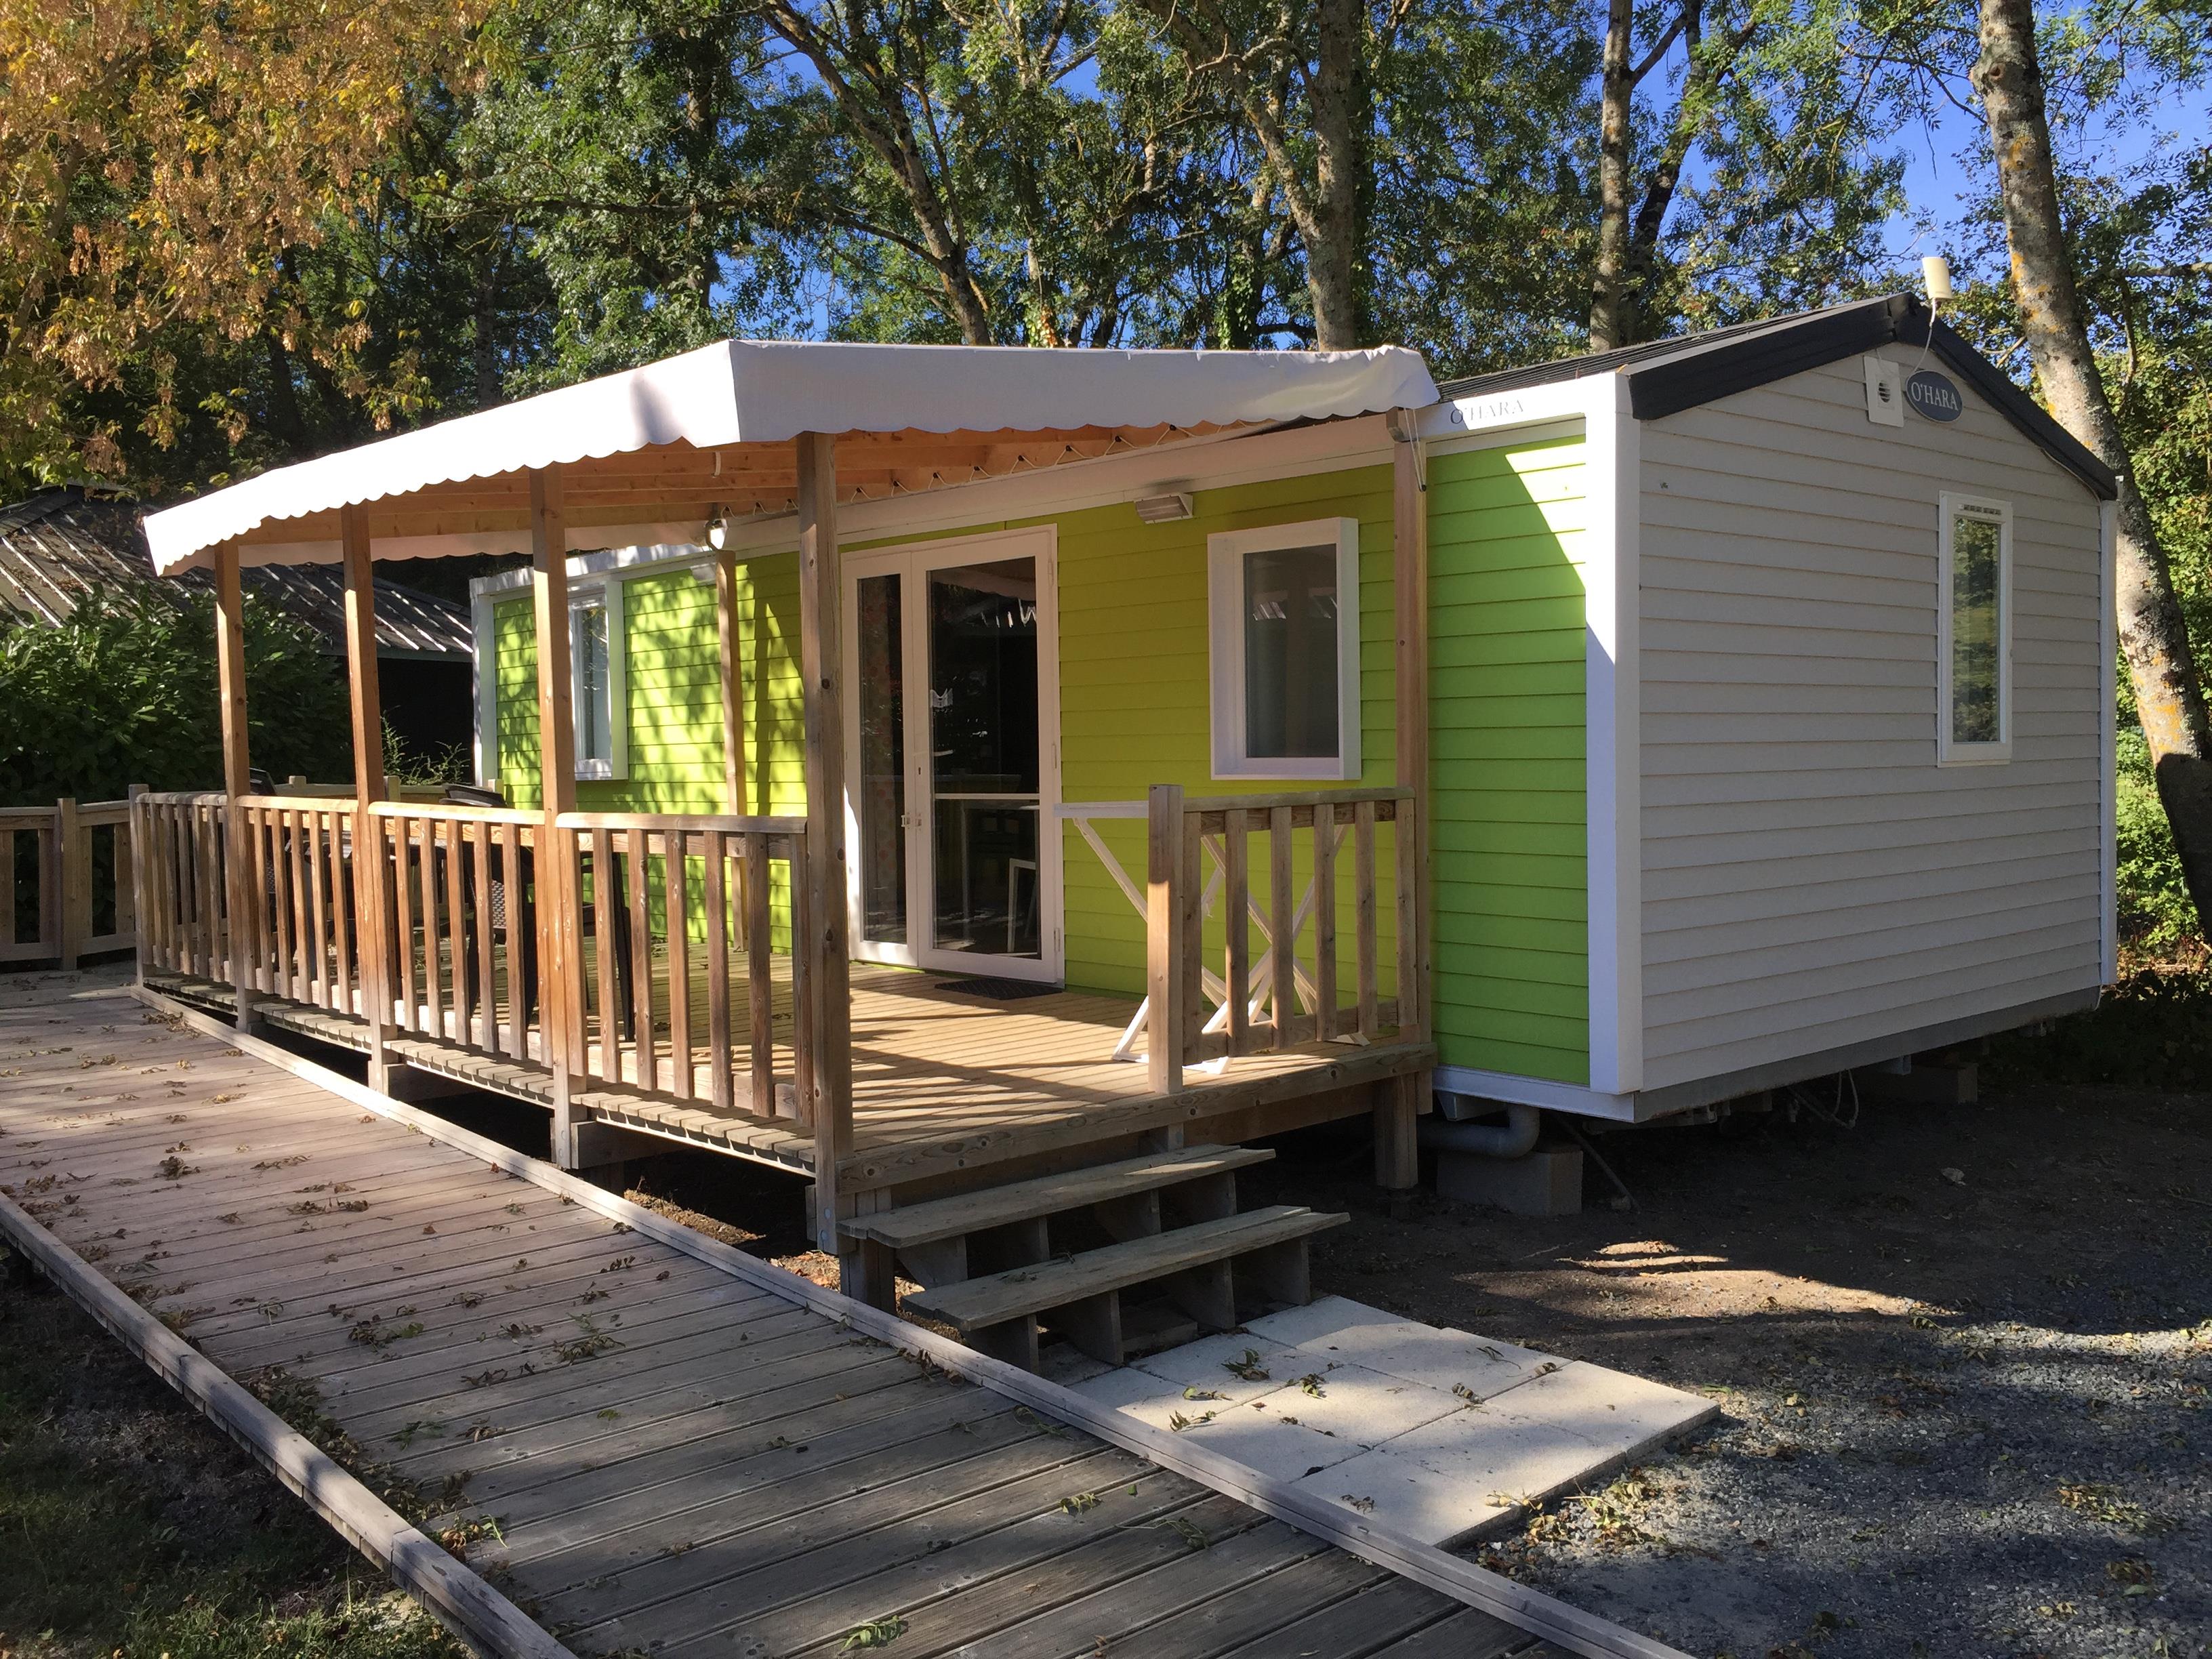 Location - Mobil-Home Pmr Confort 34 M² (2 Chambres) + Terrasse Couverte - Camping Les Granges, Luynes